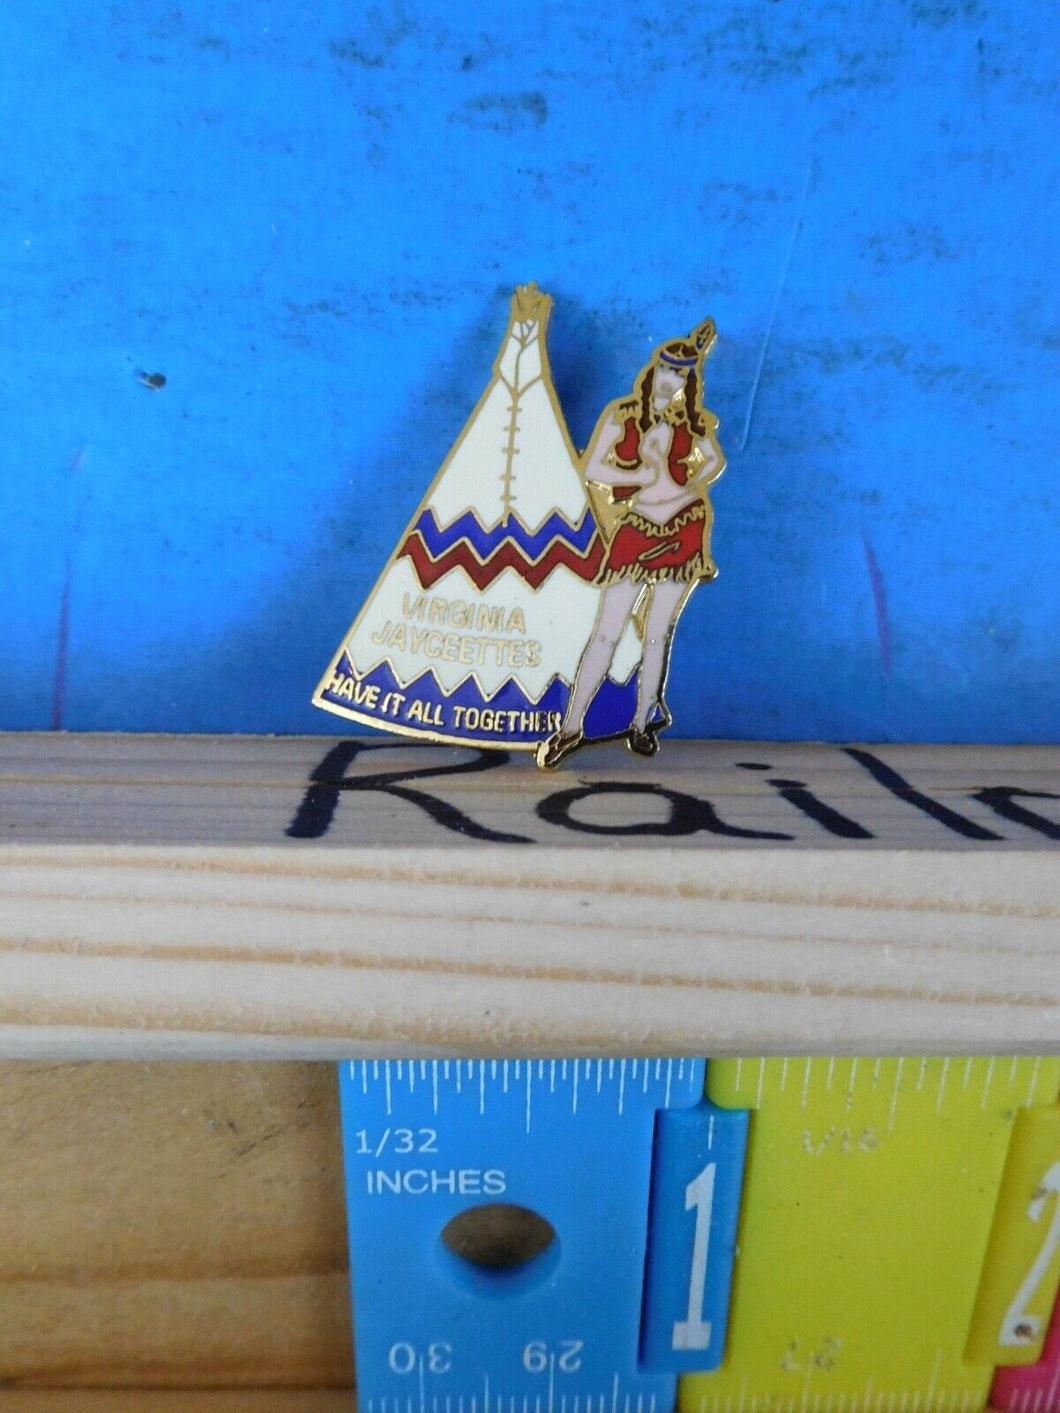 Jaycees Virginia Jaycettes Have it all together Tepee Indian Maiden pin